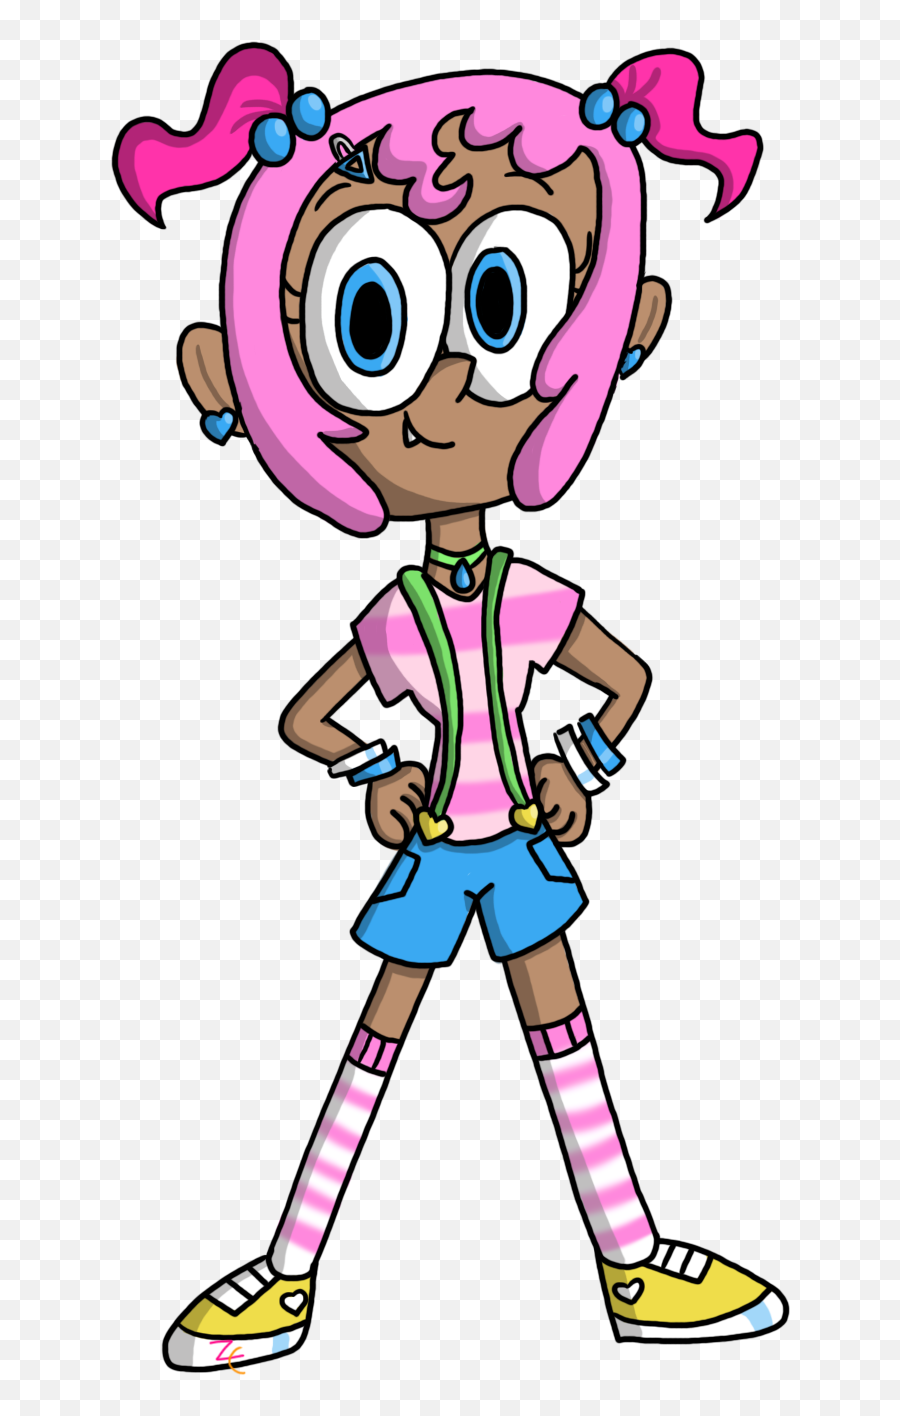 So All Of My Unikitty Humanization Pictures So Far - Unikitty Human Princess Unikitty Emoji,Facebook Unikitty Emoticon